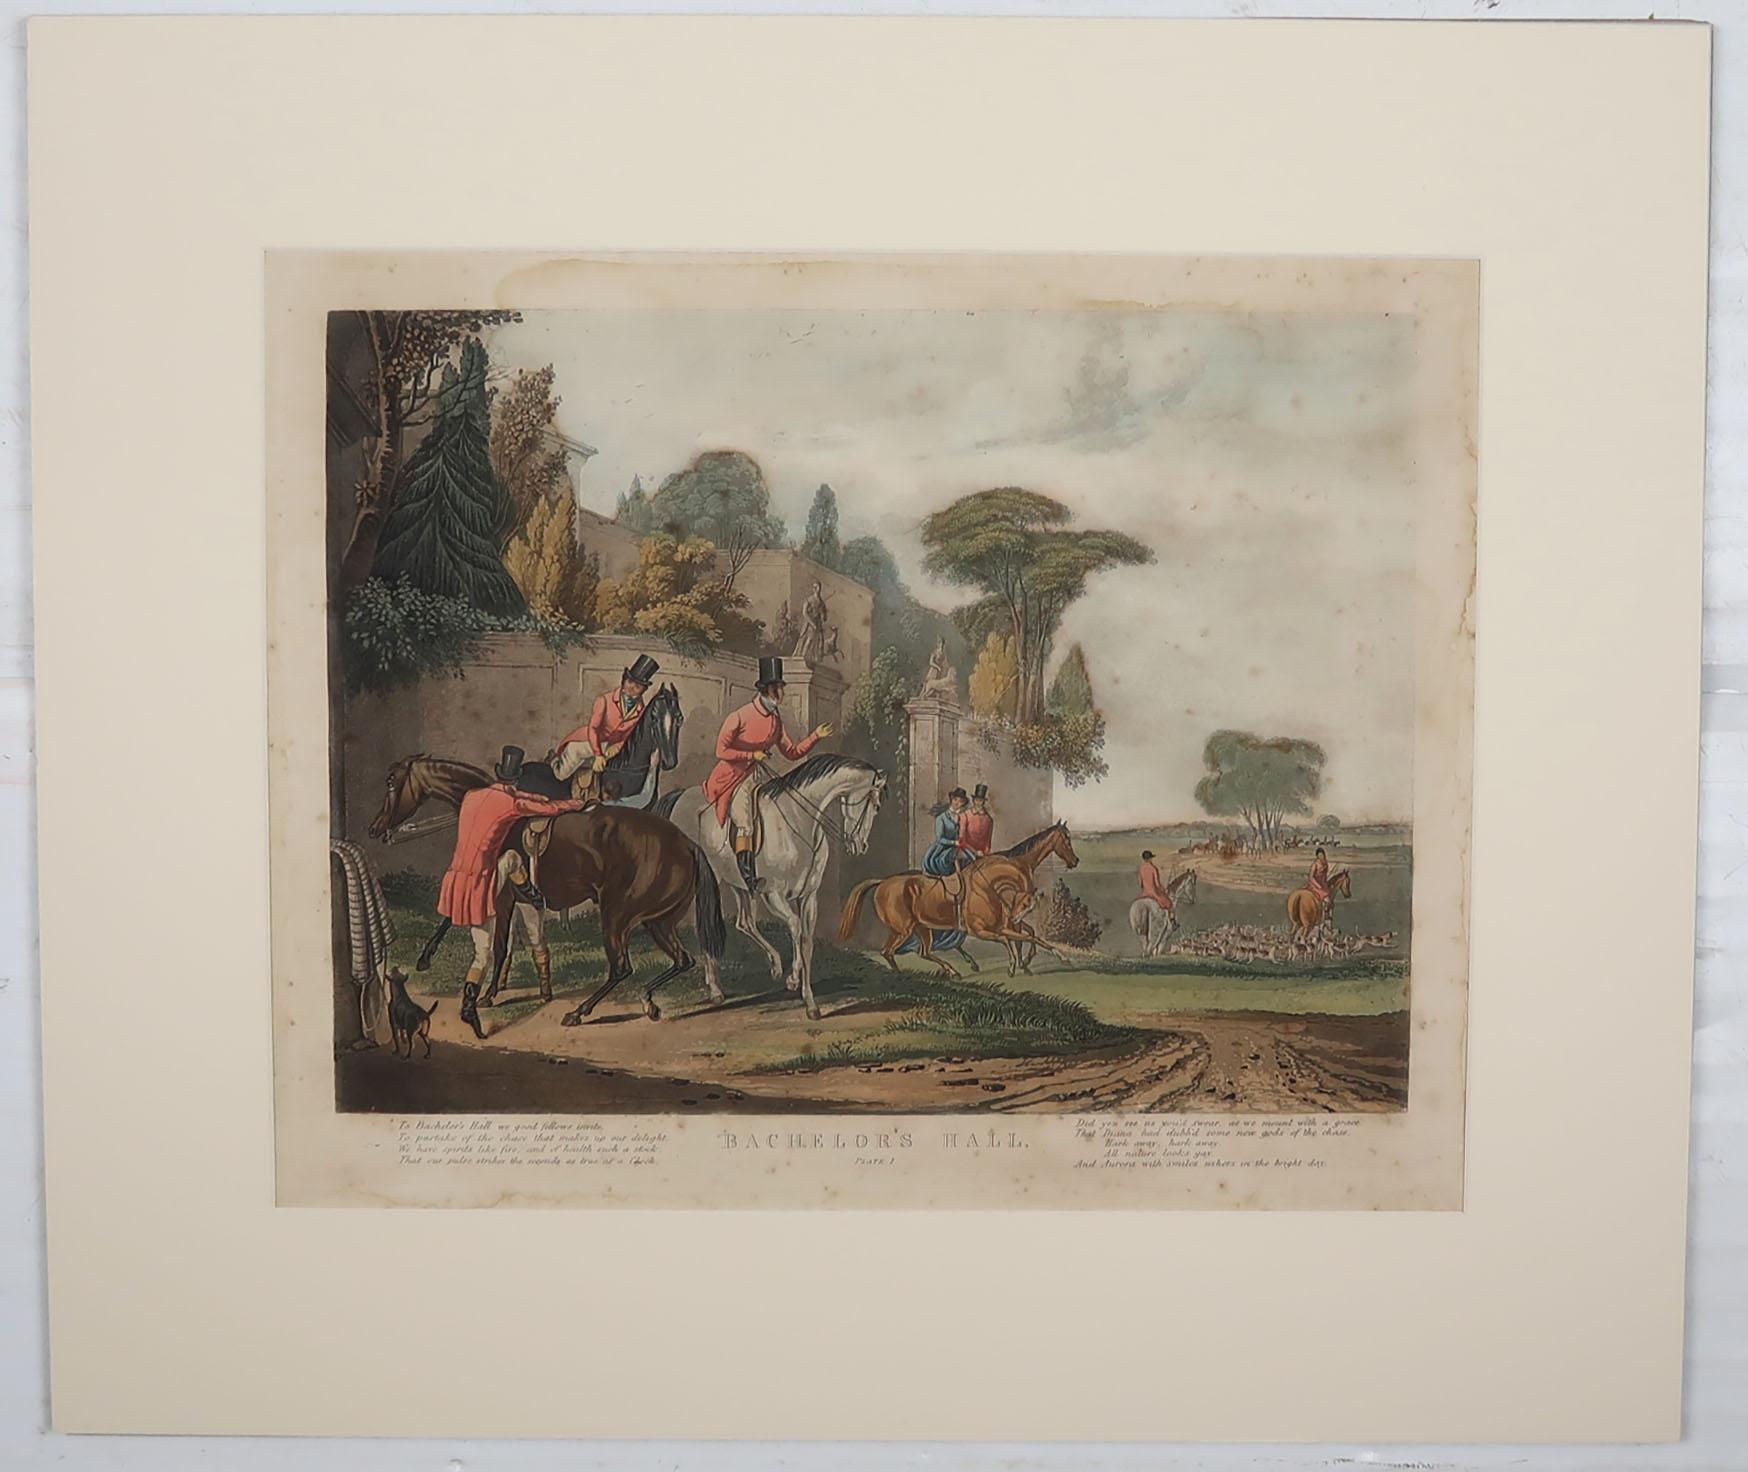 English Set of 6 Original Antique Sporting Prints After Turner, Early 19th Century